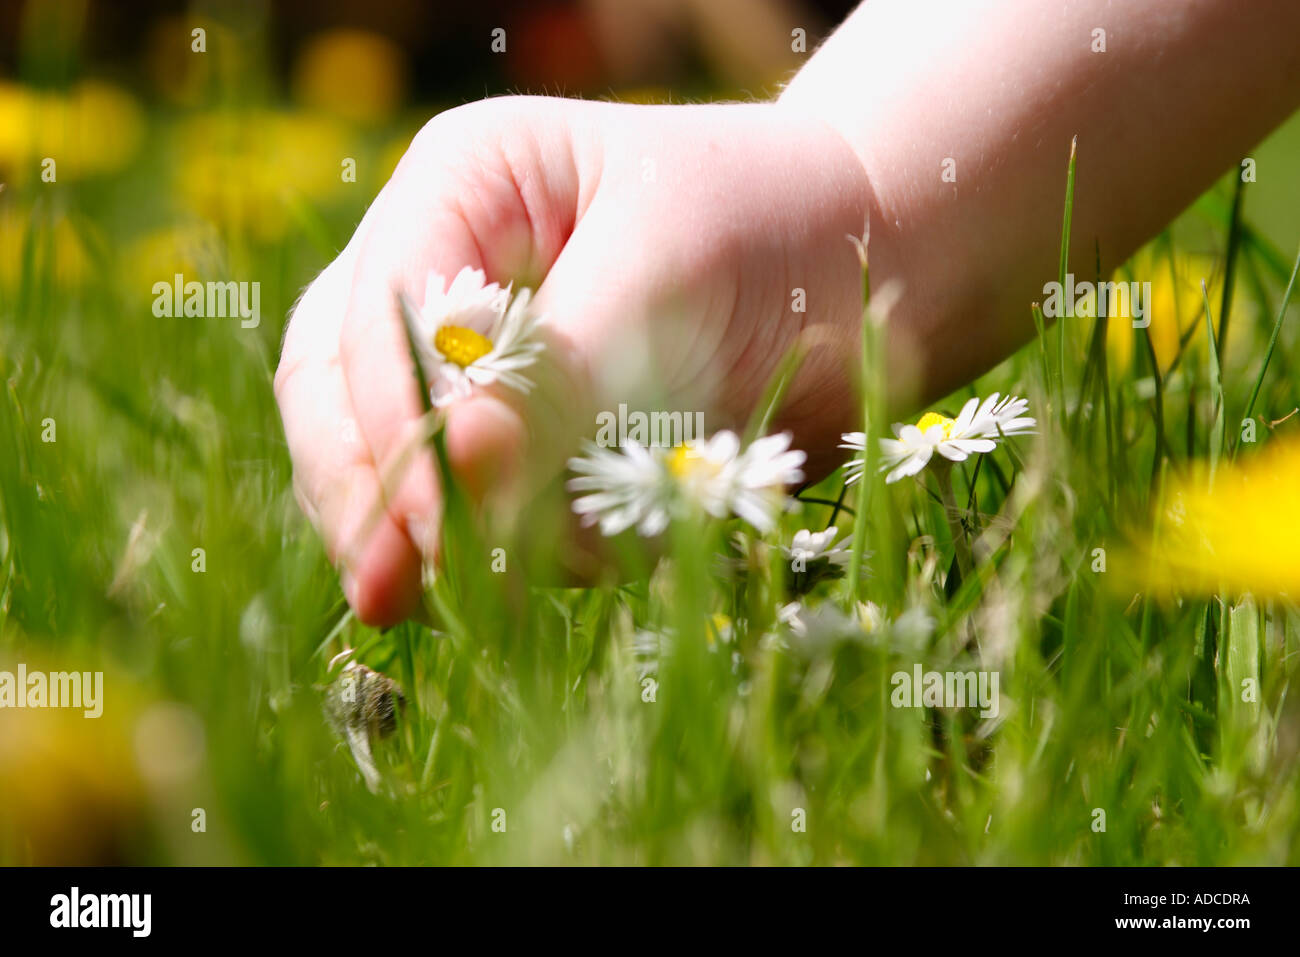 landscape image of a child's hand picking a daisy from a grass lawn on a sunny day Stock Photo